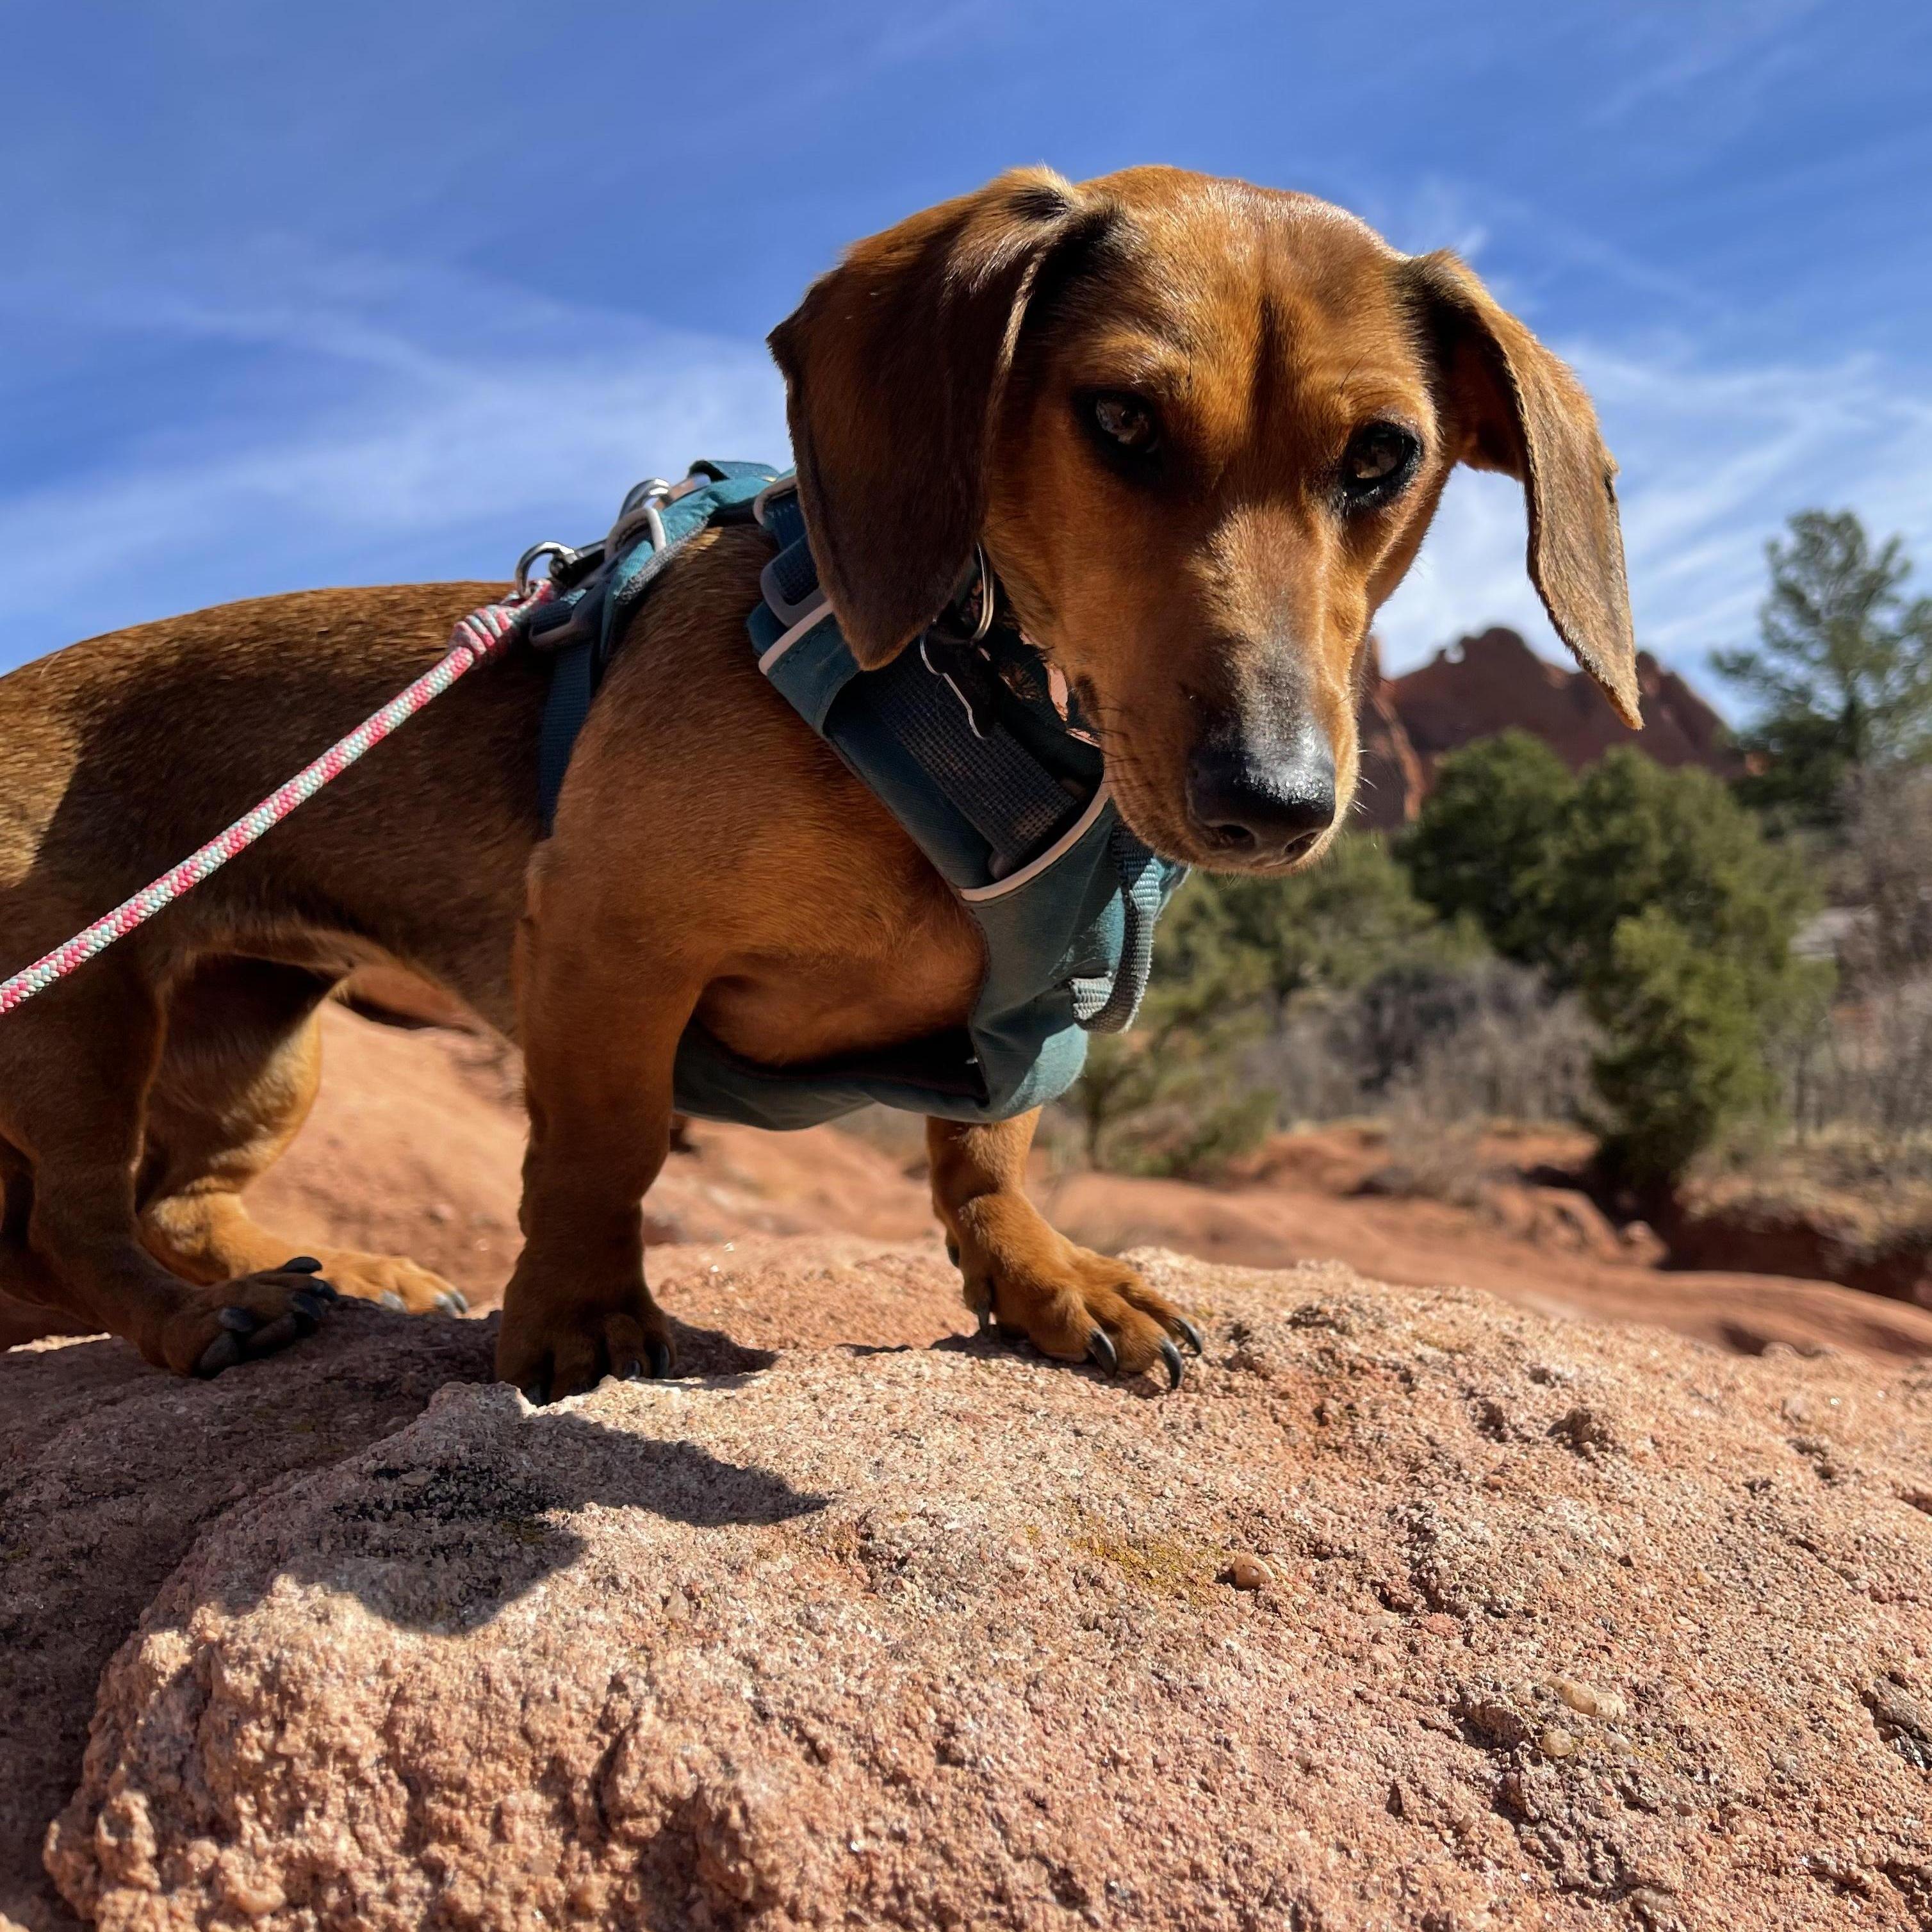 Penny hiking at Garden of the Gods in Colorado Springs, CO. She loved hiking and climbing the big rocks.